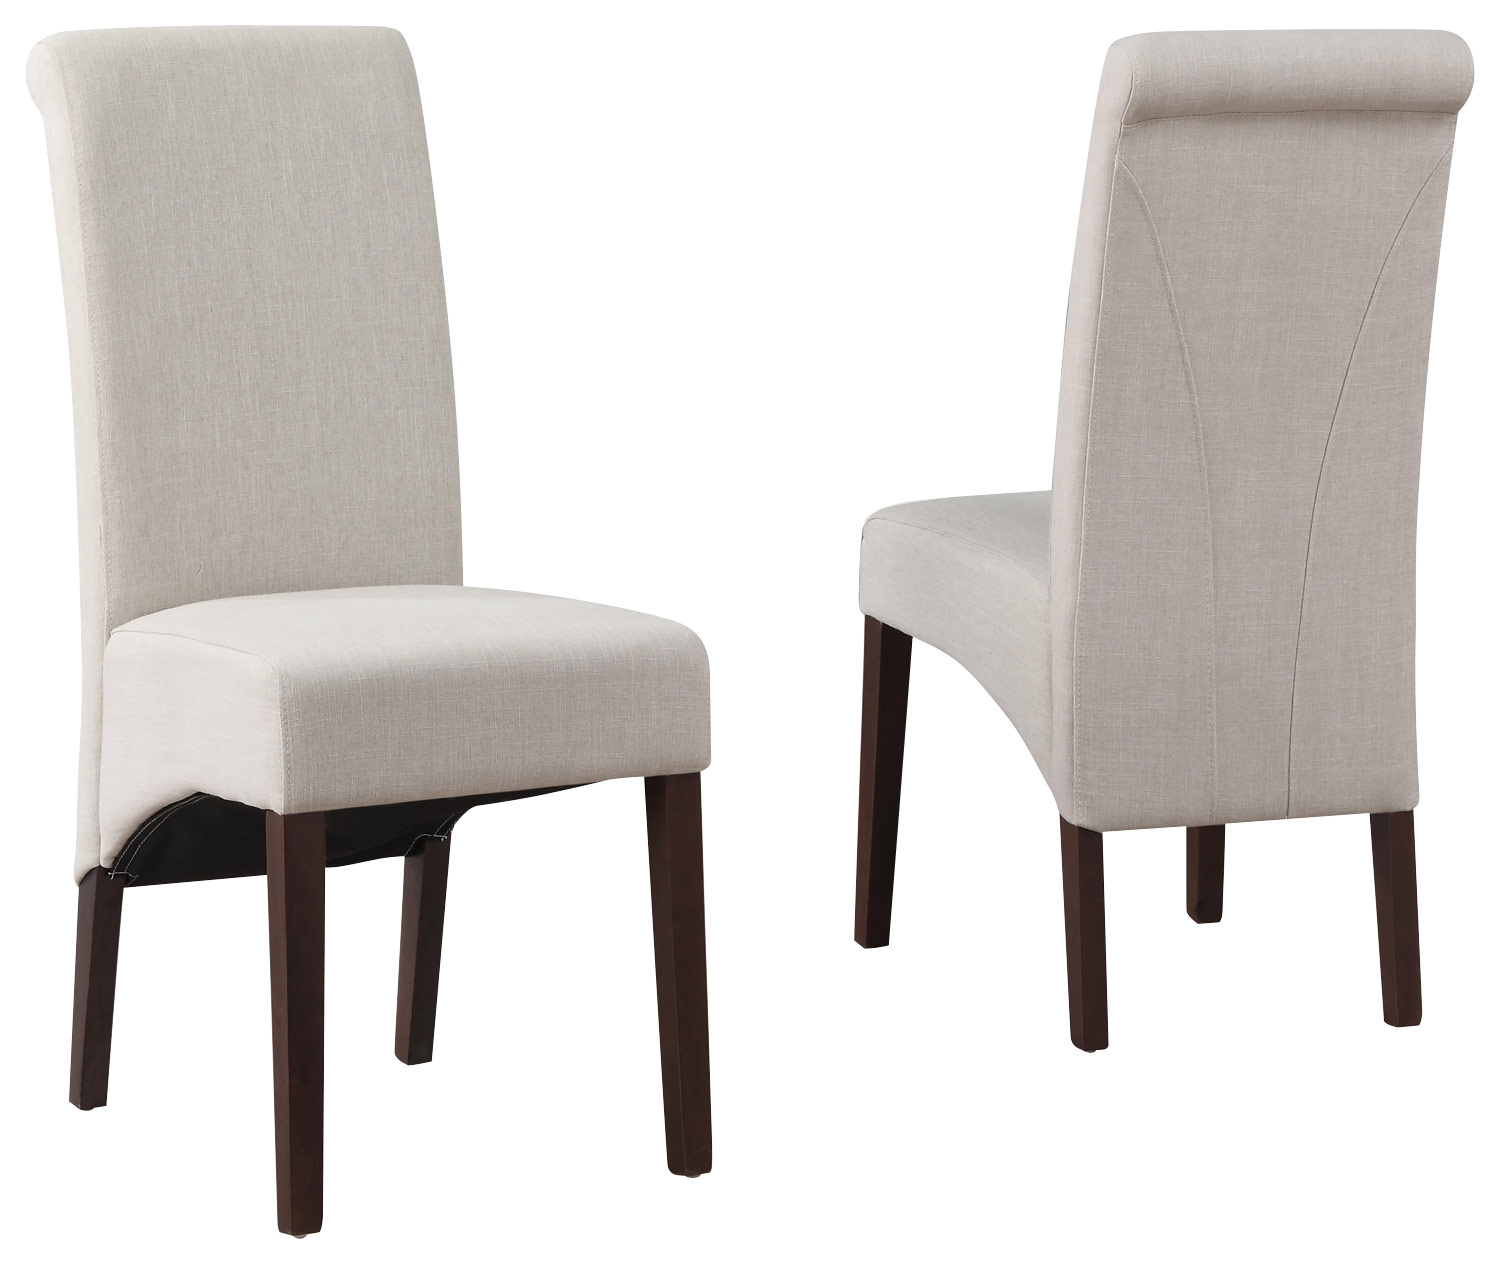 Simpli Home - Avalon Deluxe Parson Chairs (Set of 2) - Natural was $268.99 now $209.99 (22.0% off)